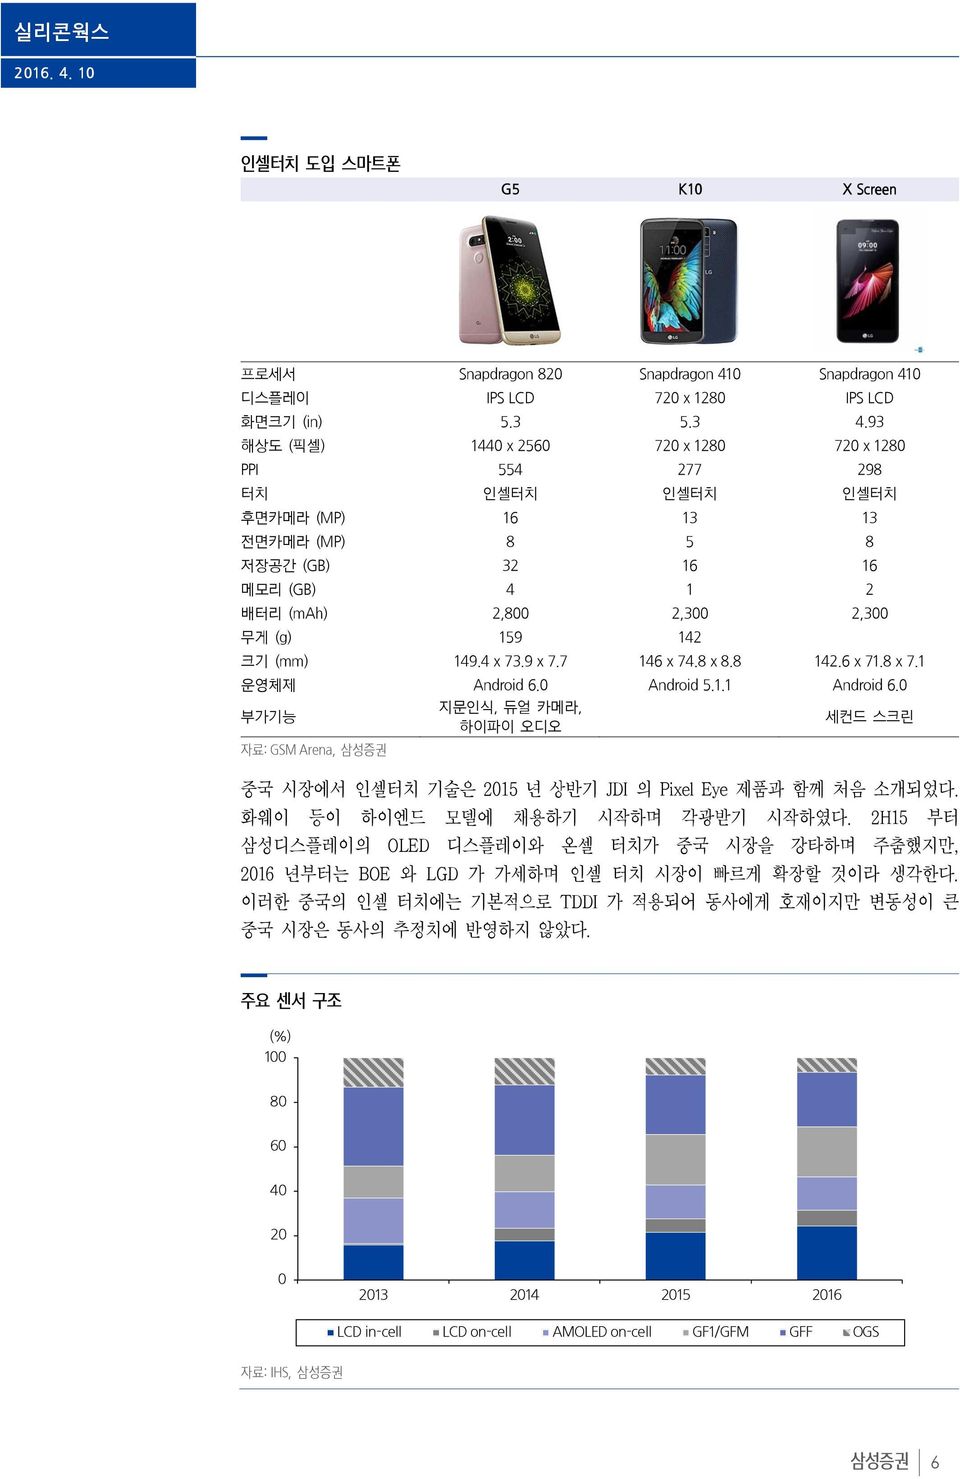 4 x 73.9 x 7.7 146 x 74.8 x 8.8 142.6 x 71.8 x 7.1 운영체제 Android 6. Android 5.1.1 Android 6.